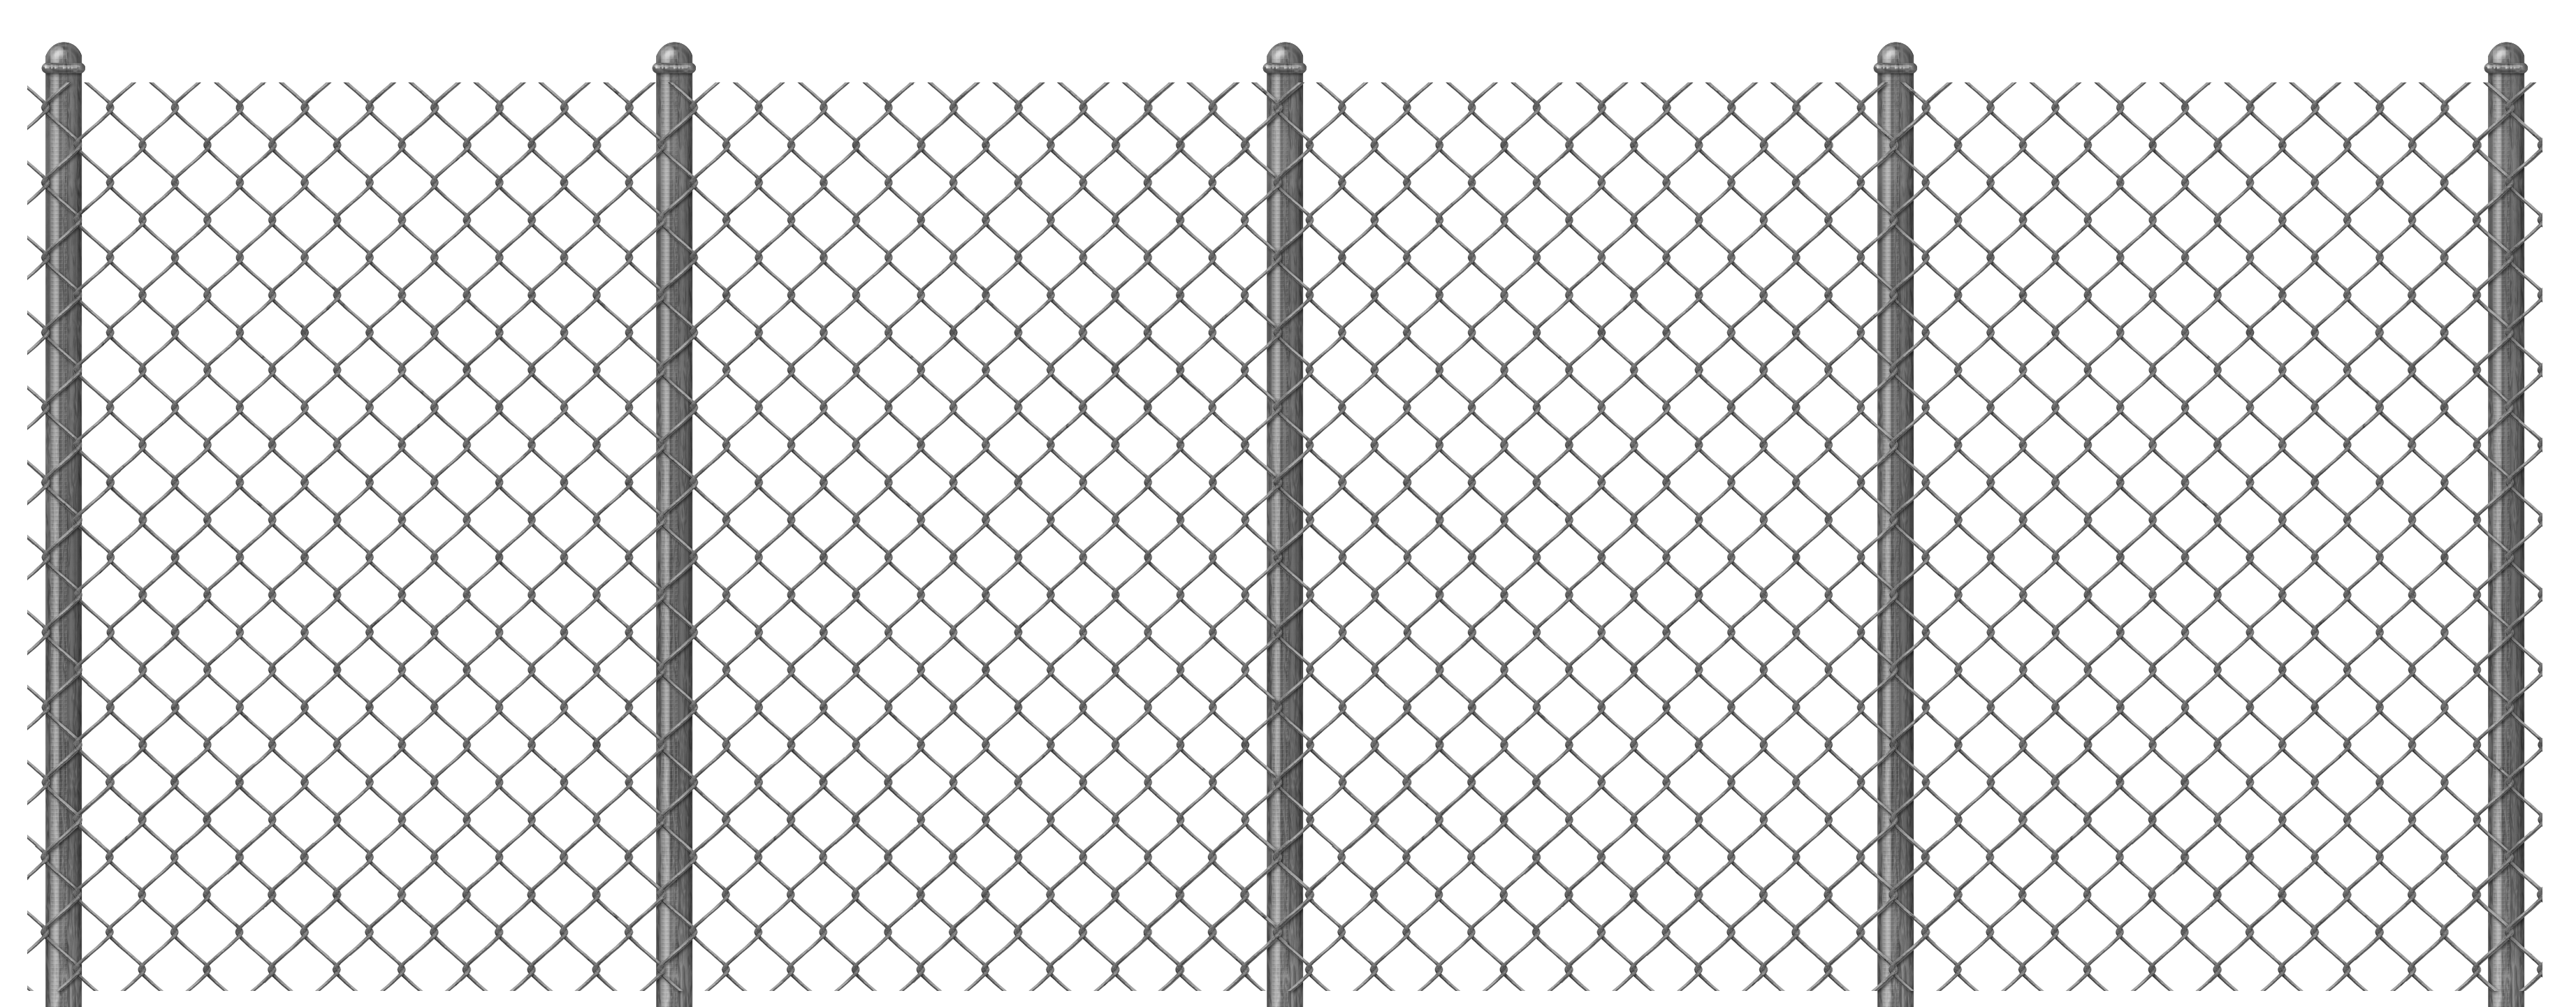 Transparent Chain Link Fence PNG Clipart.